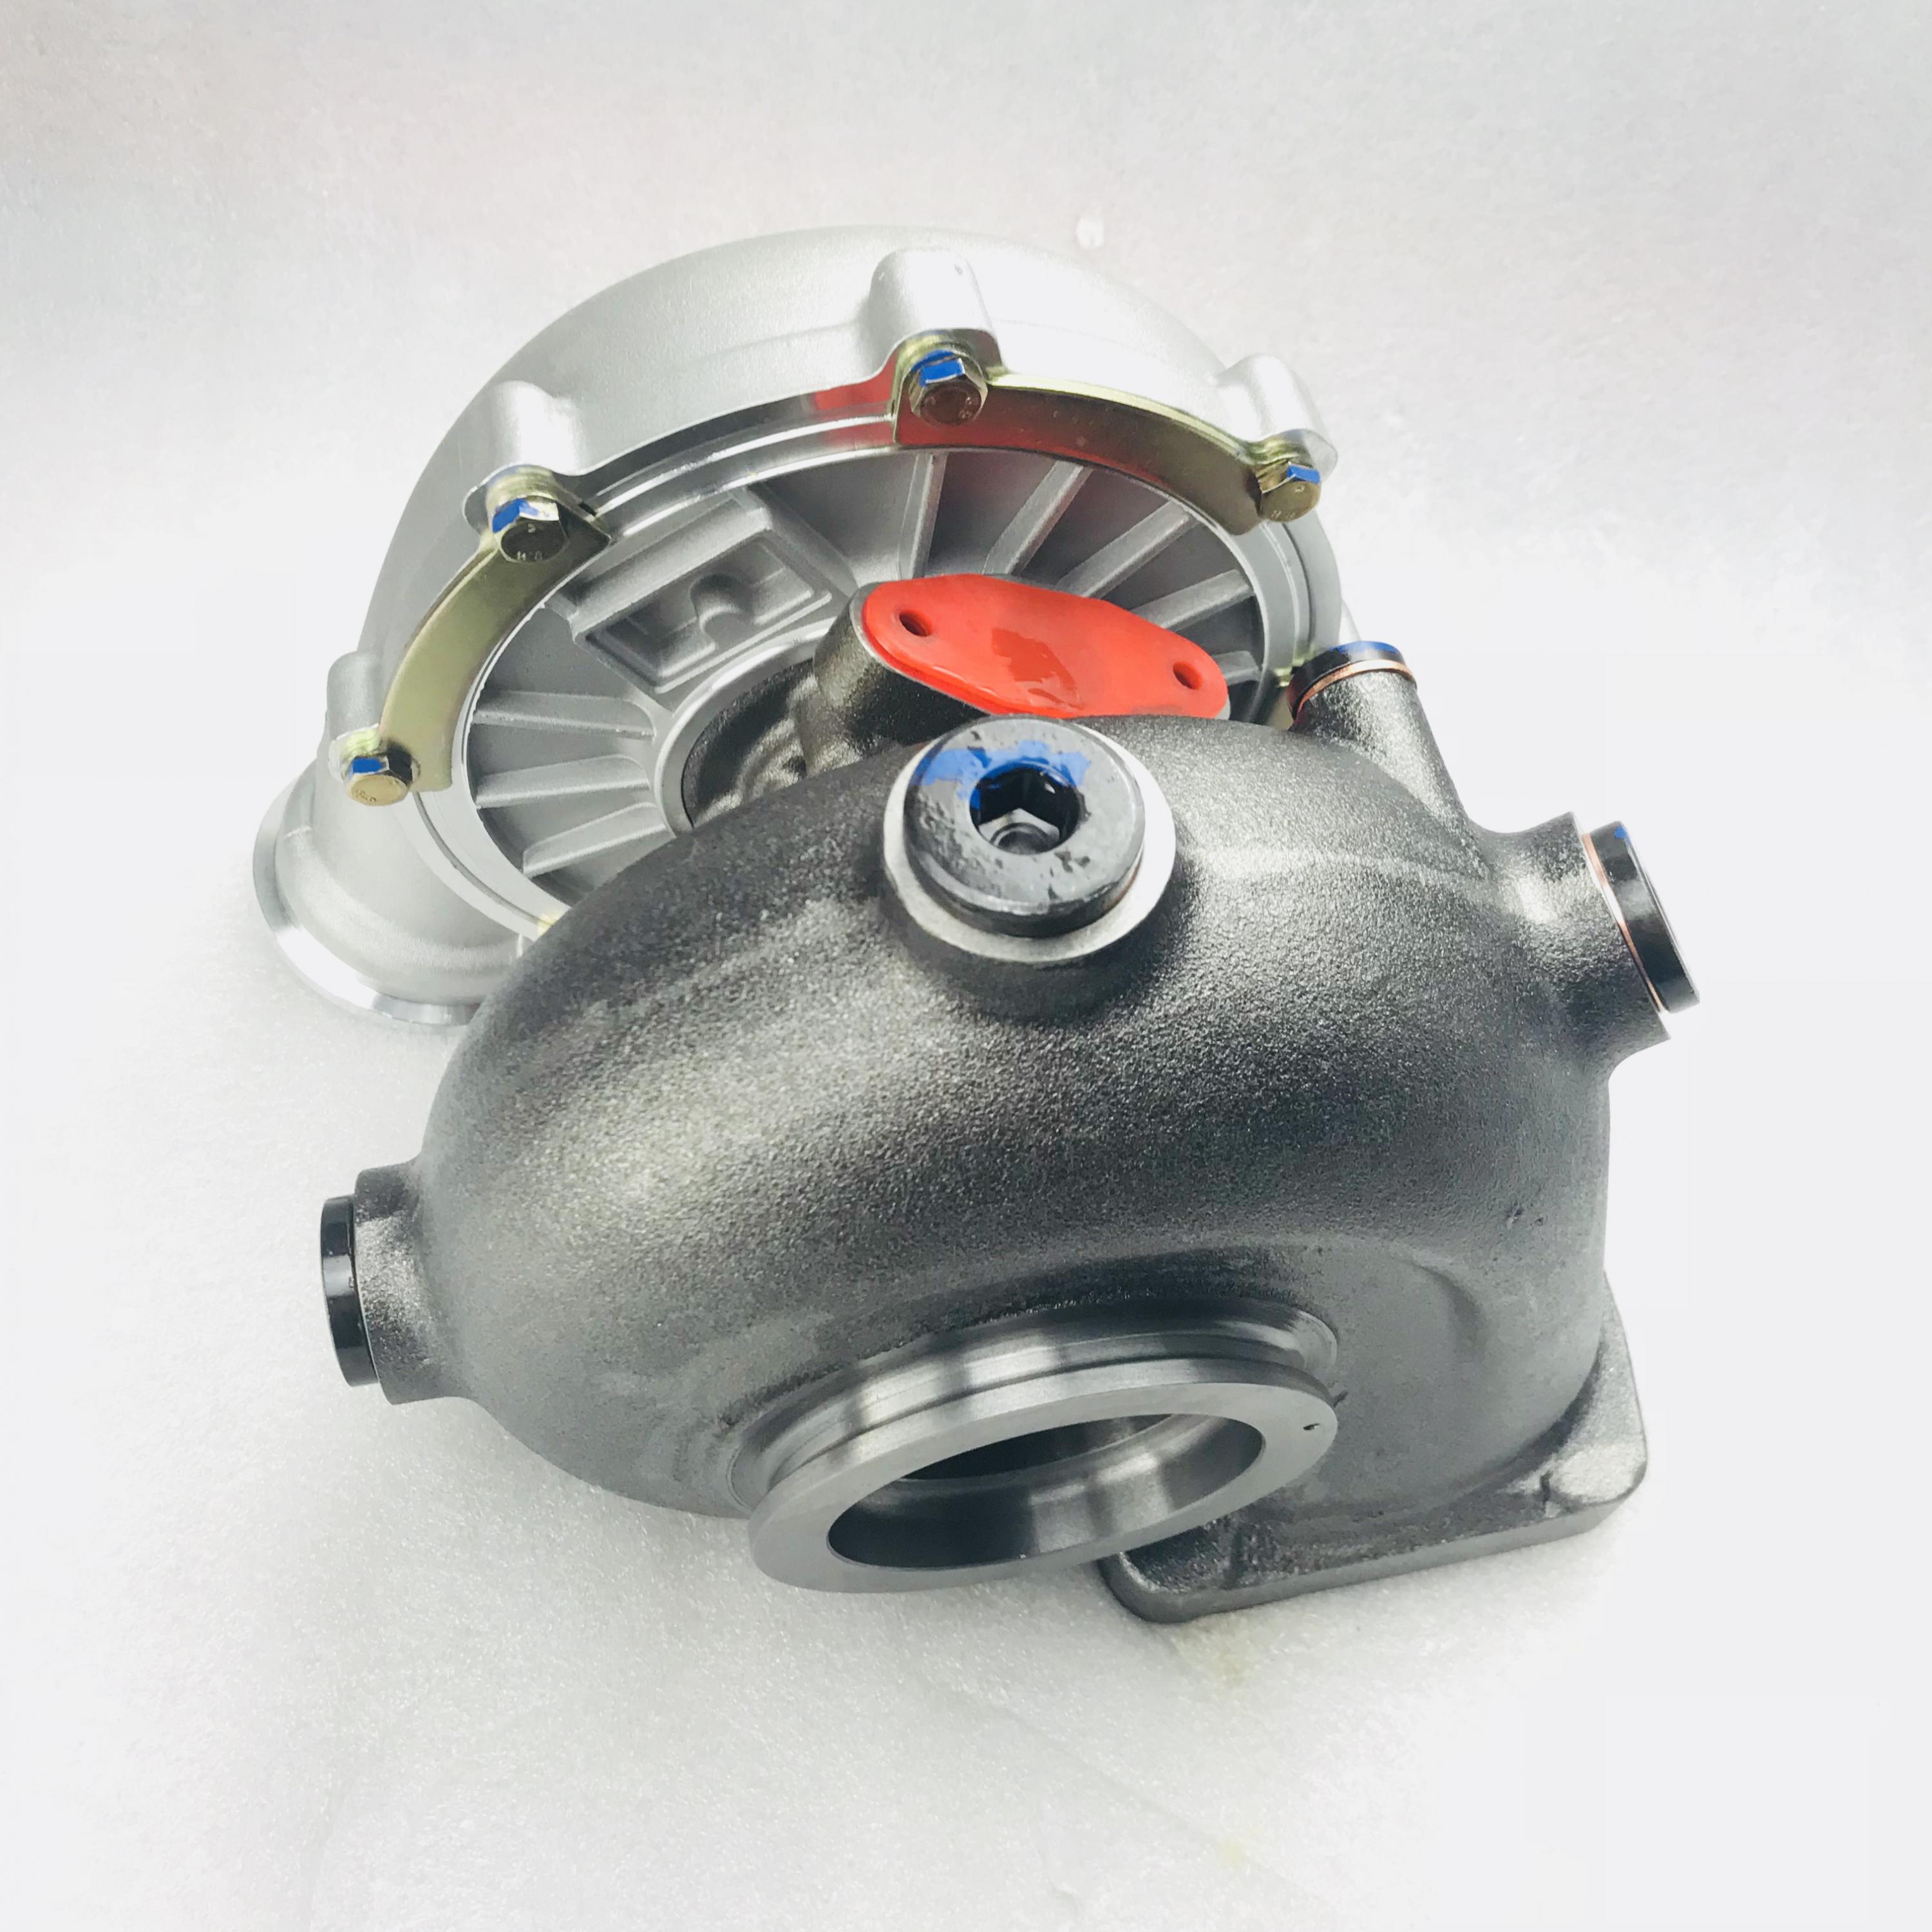 K26 Turbo 53269886094 3802082 turbocharger for Penta Ship with TAMD31 TMD31 Engine